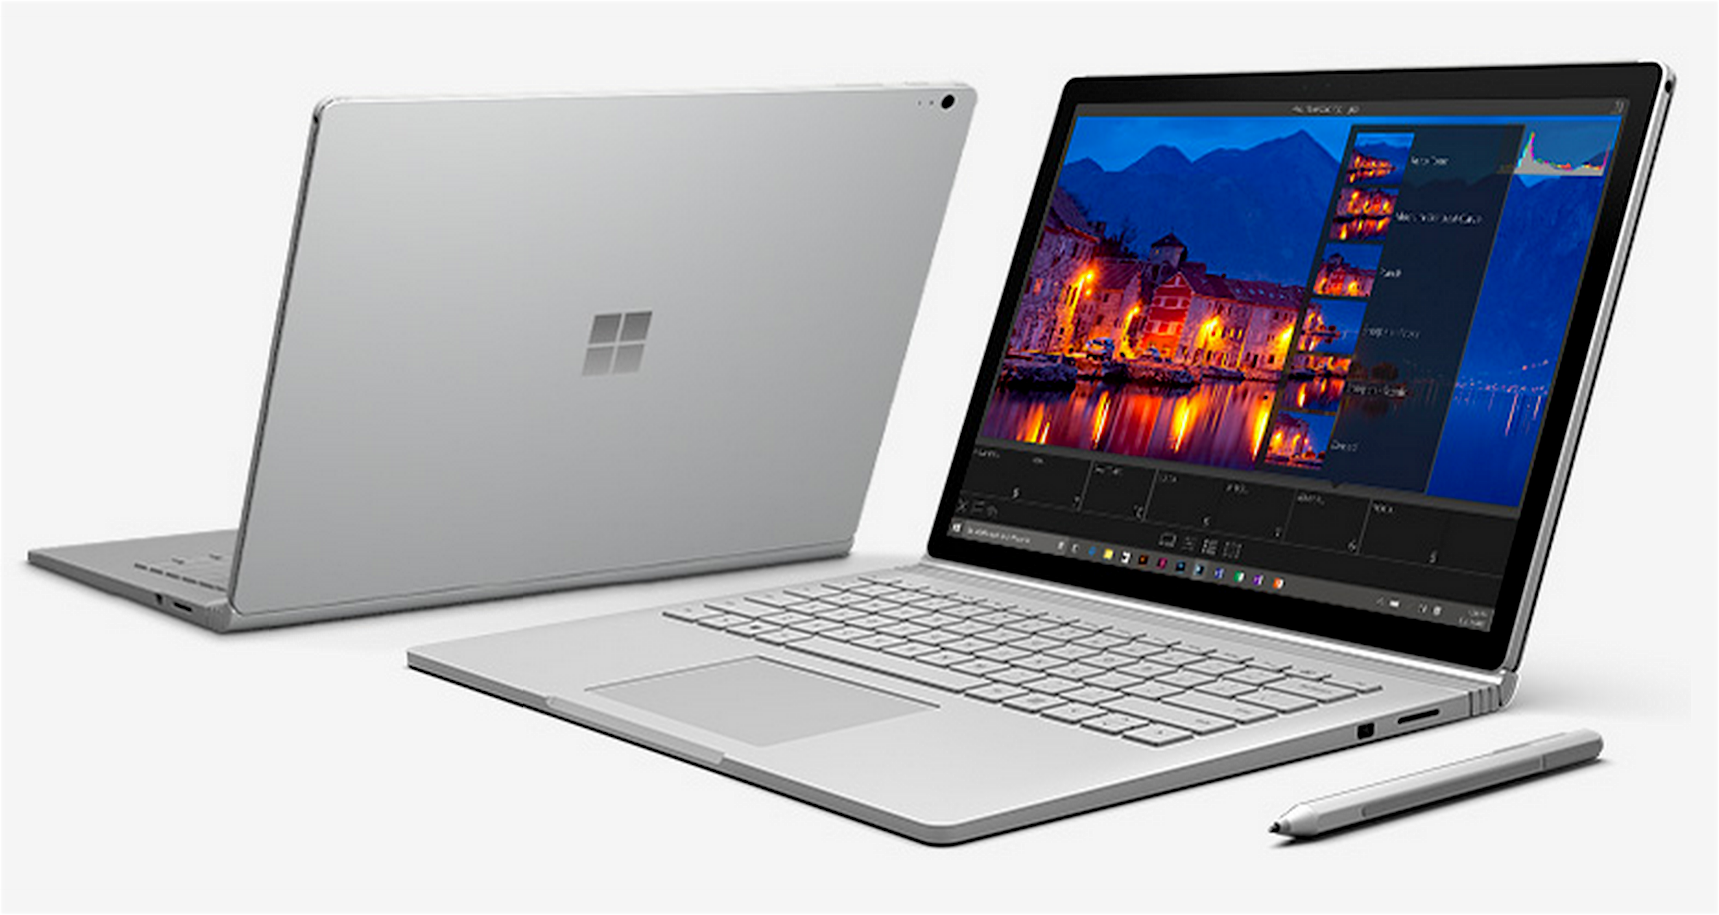 The Microsoft Surface Book Is a Windows Laptop You'll Actually Want to